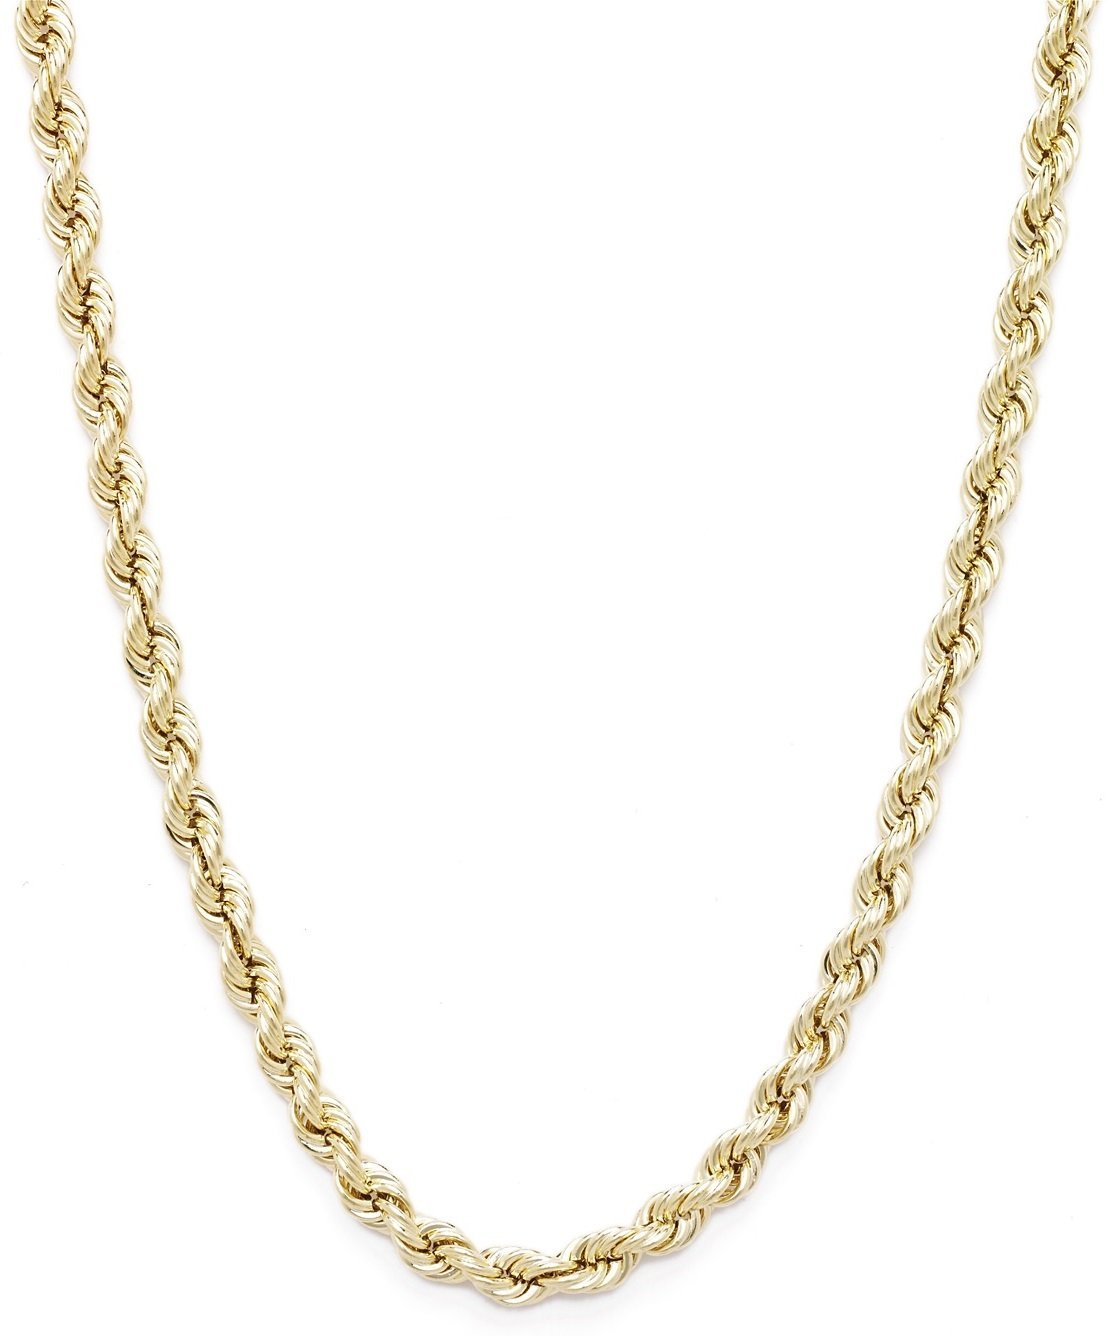 10k Yellow Gold Hollow Rope Chain Necklace with Lobster Claw Clasp, 2mm